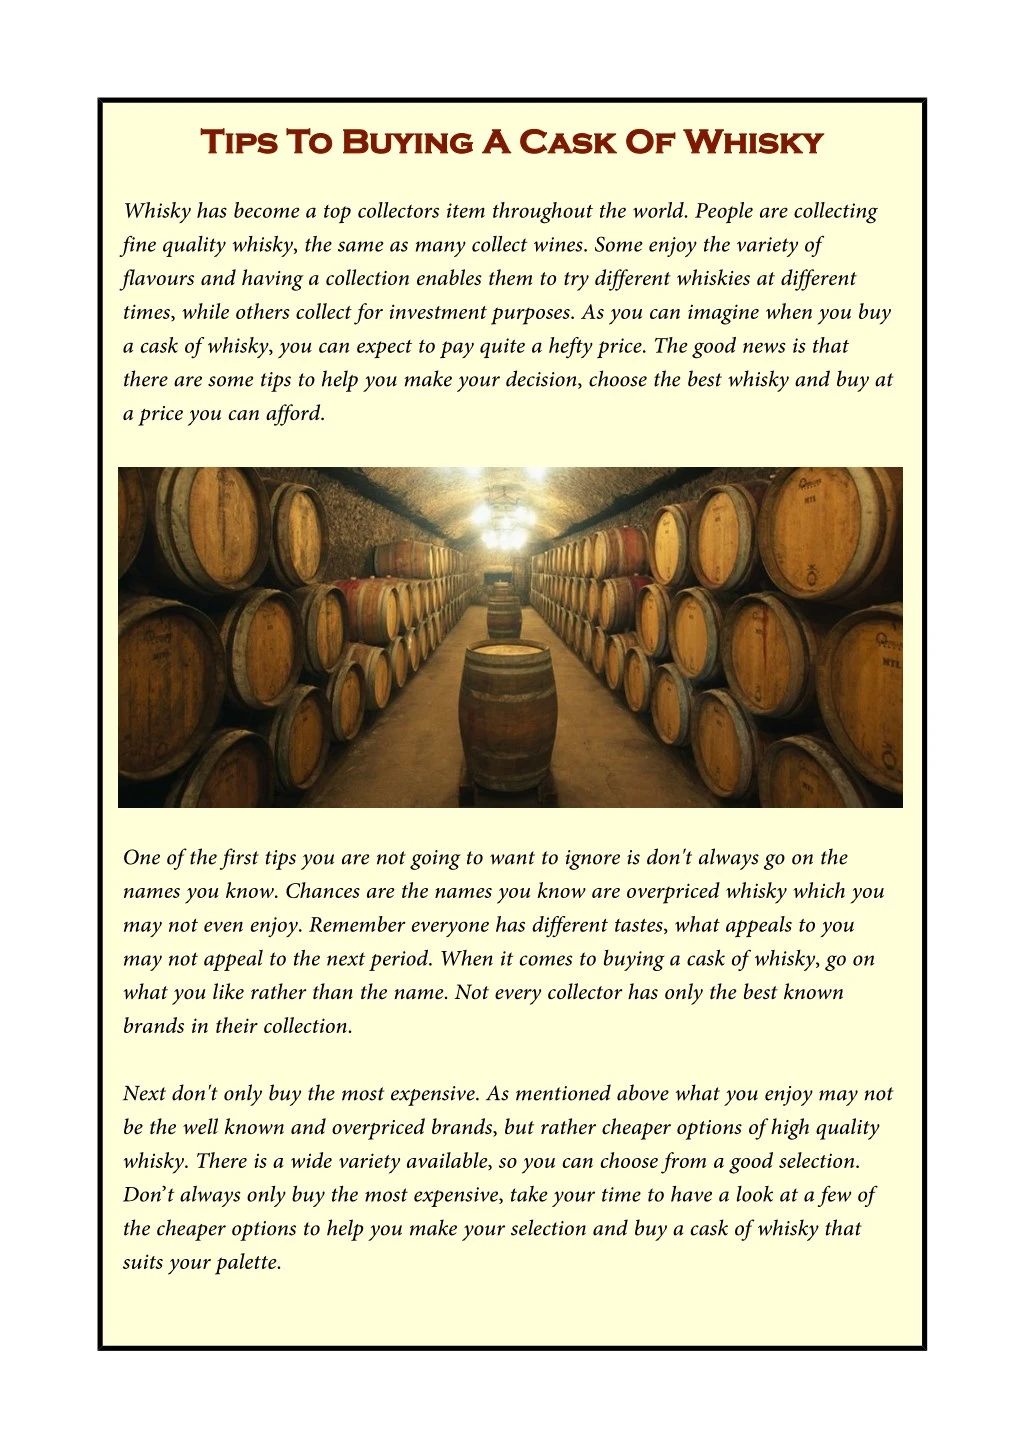 tips to buying a cask of whisky tips to buying